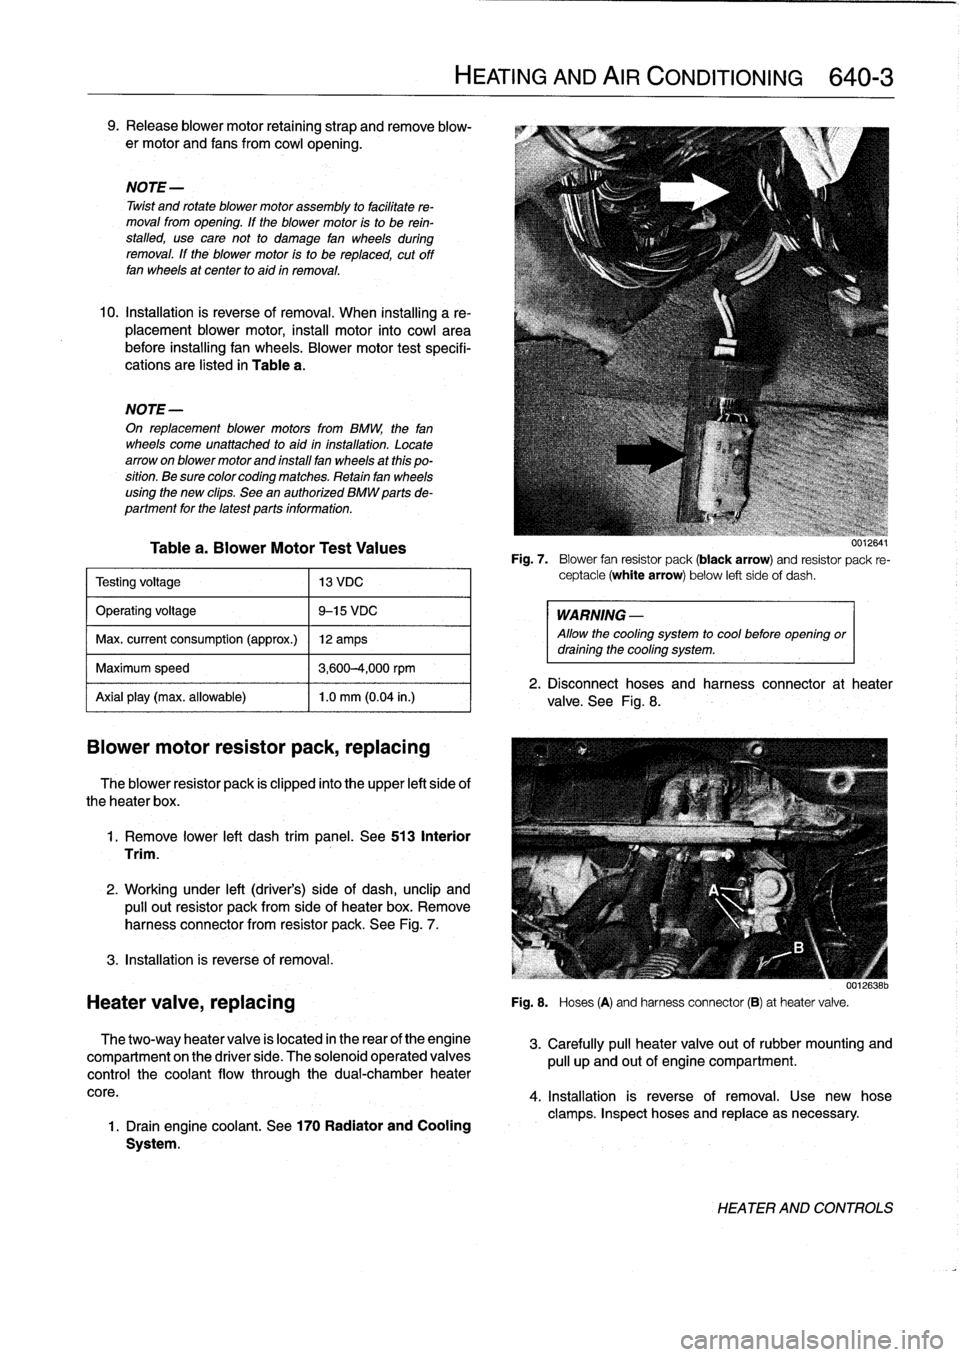 BMW 323i 1993 E36 Repair Manual 
9
.
Release
blower
motor
retaining
strap
andremove
blow-
er
motor
and
fans
fromcowl
opening
.

NOTE-

Twist
and
rotate
blowermotor
assembly
to
facilítate
re-
moval
from
opening
.
If
the
blower
motor